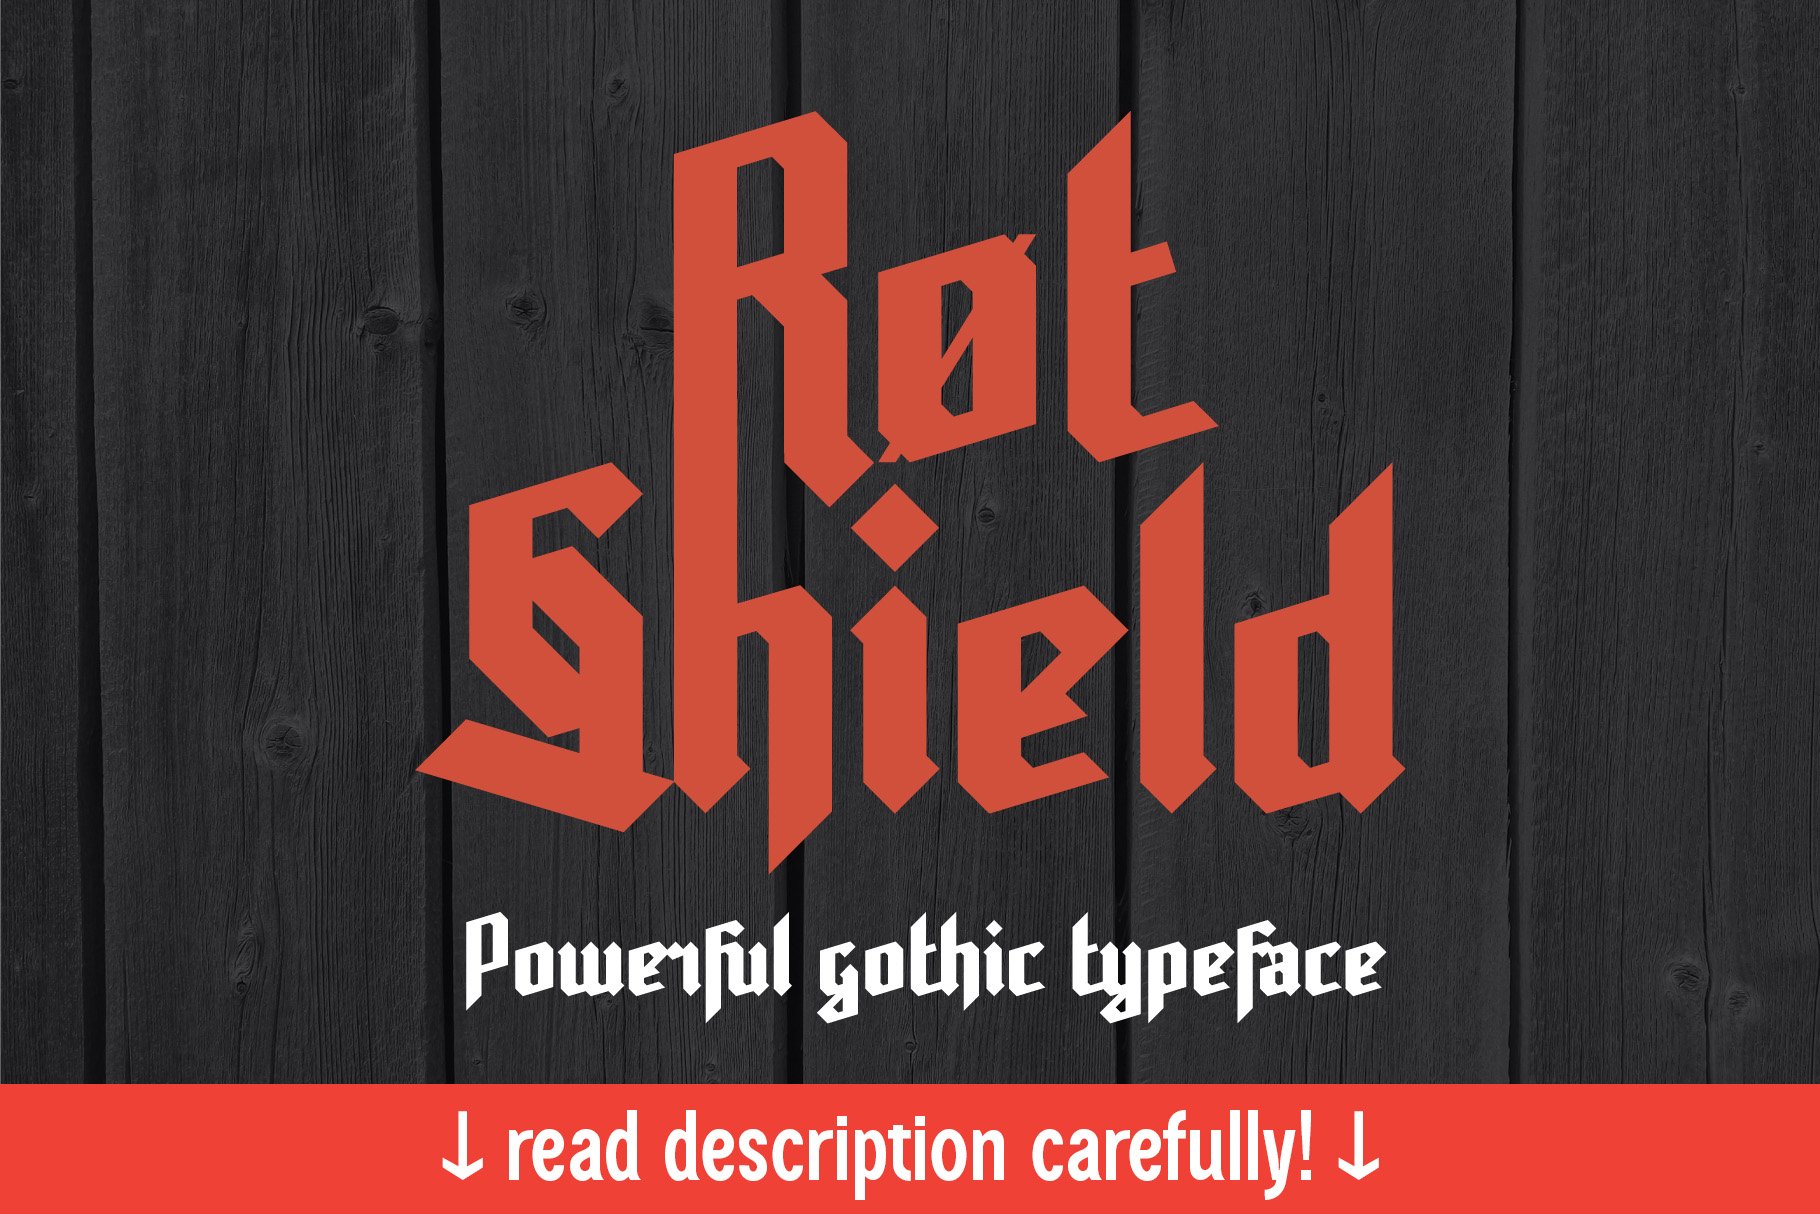 Rot Shield cover image.